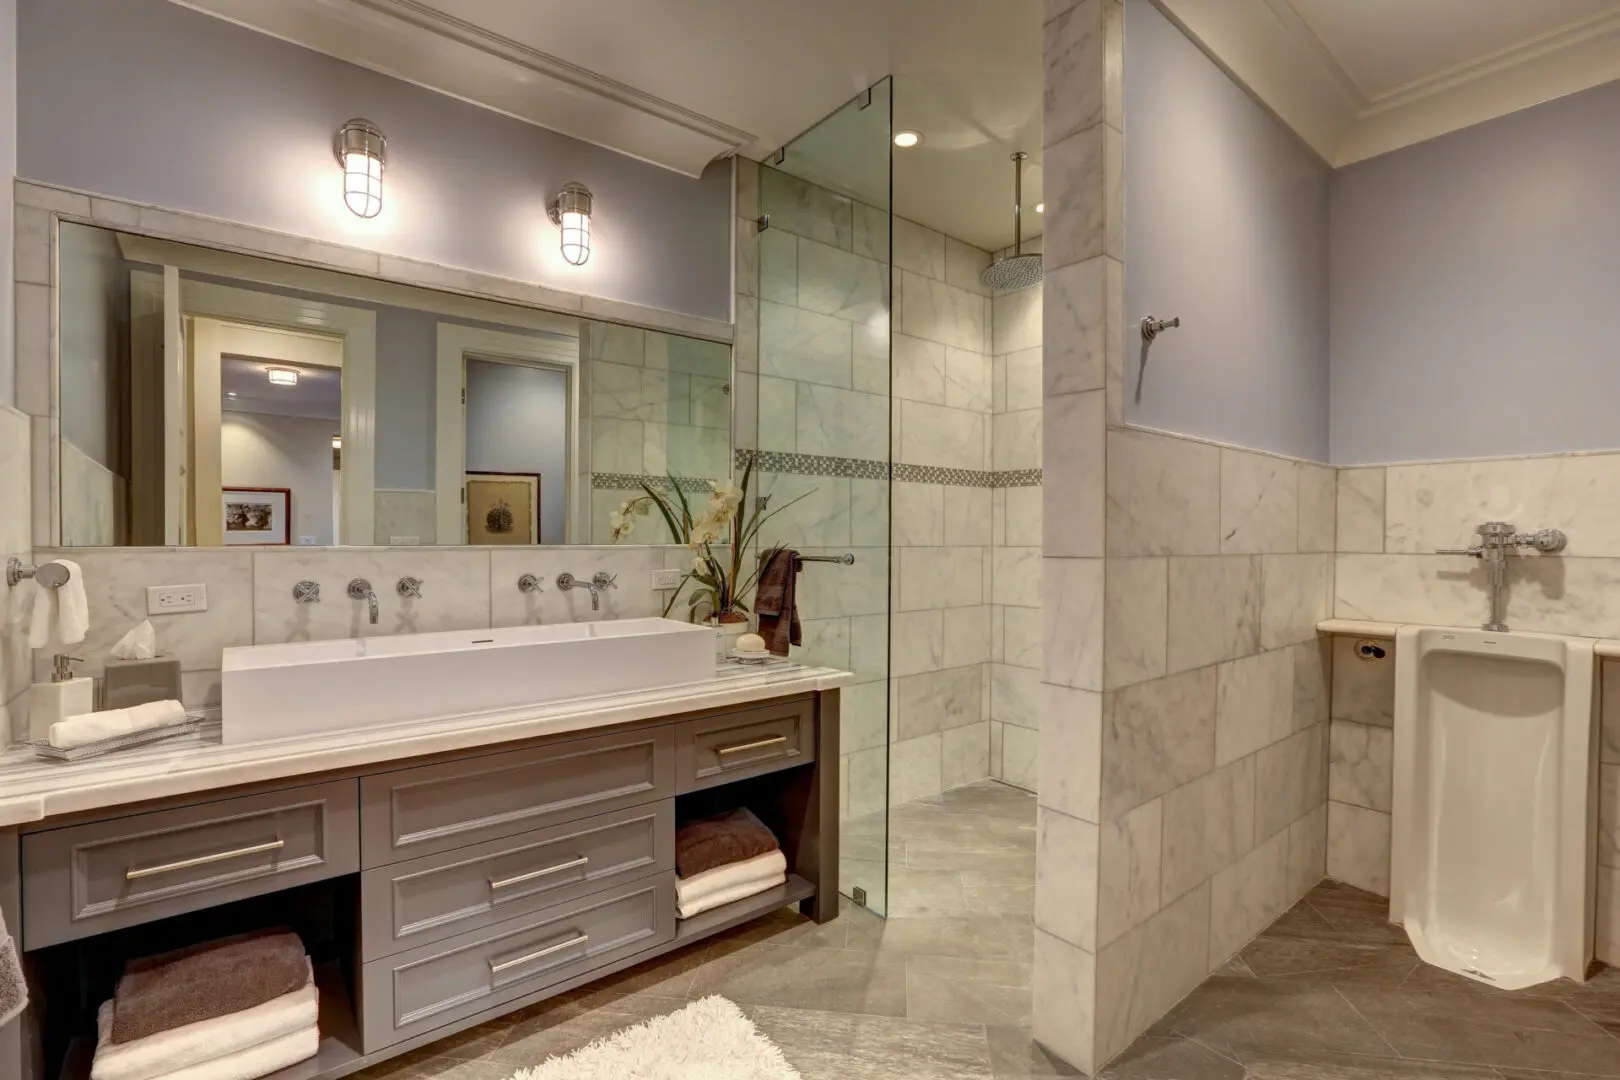 A bathroom with a large walk in shower and double vanity.